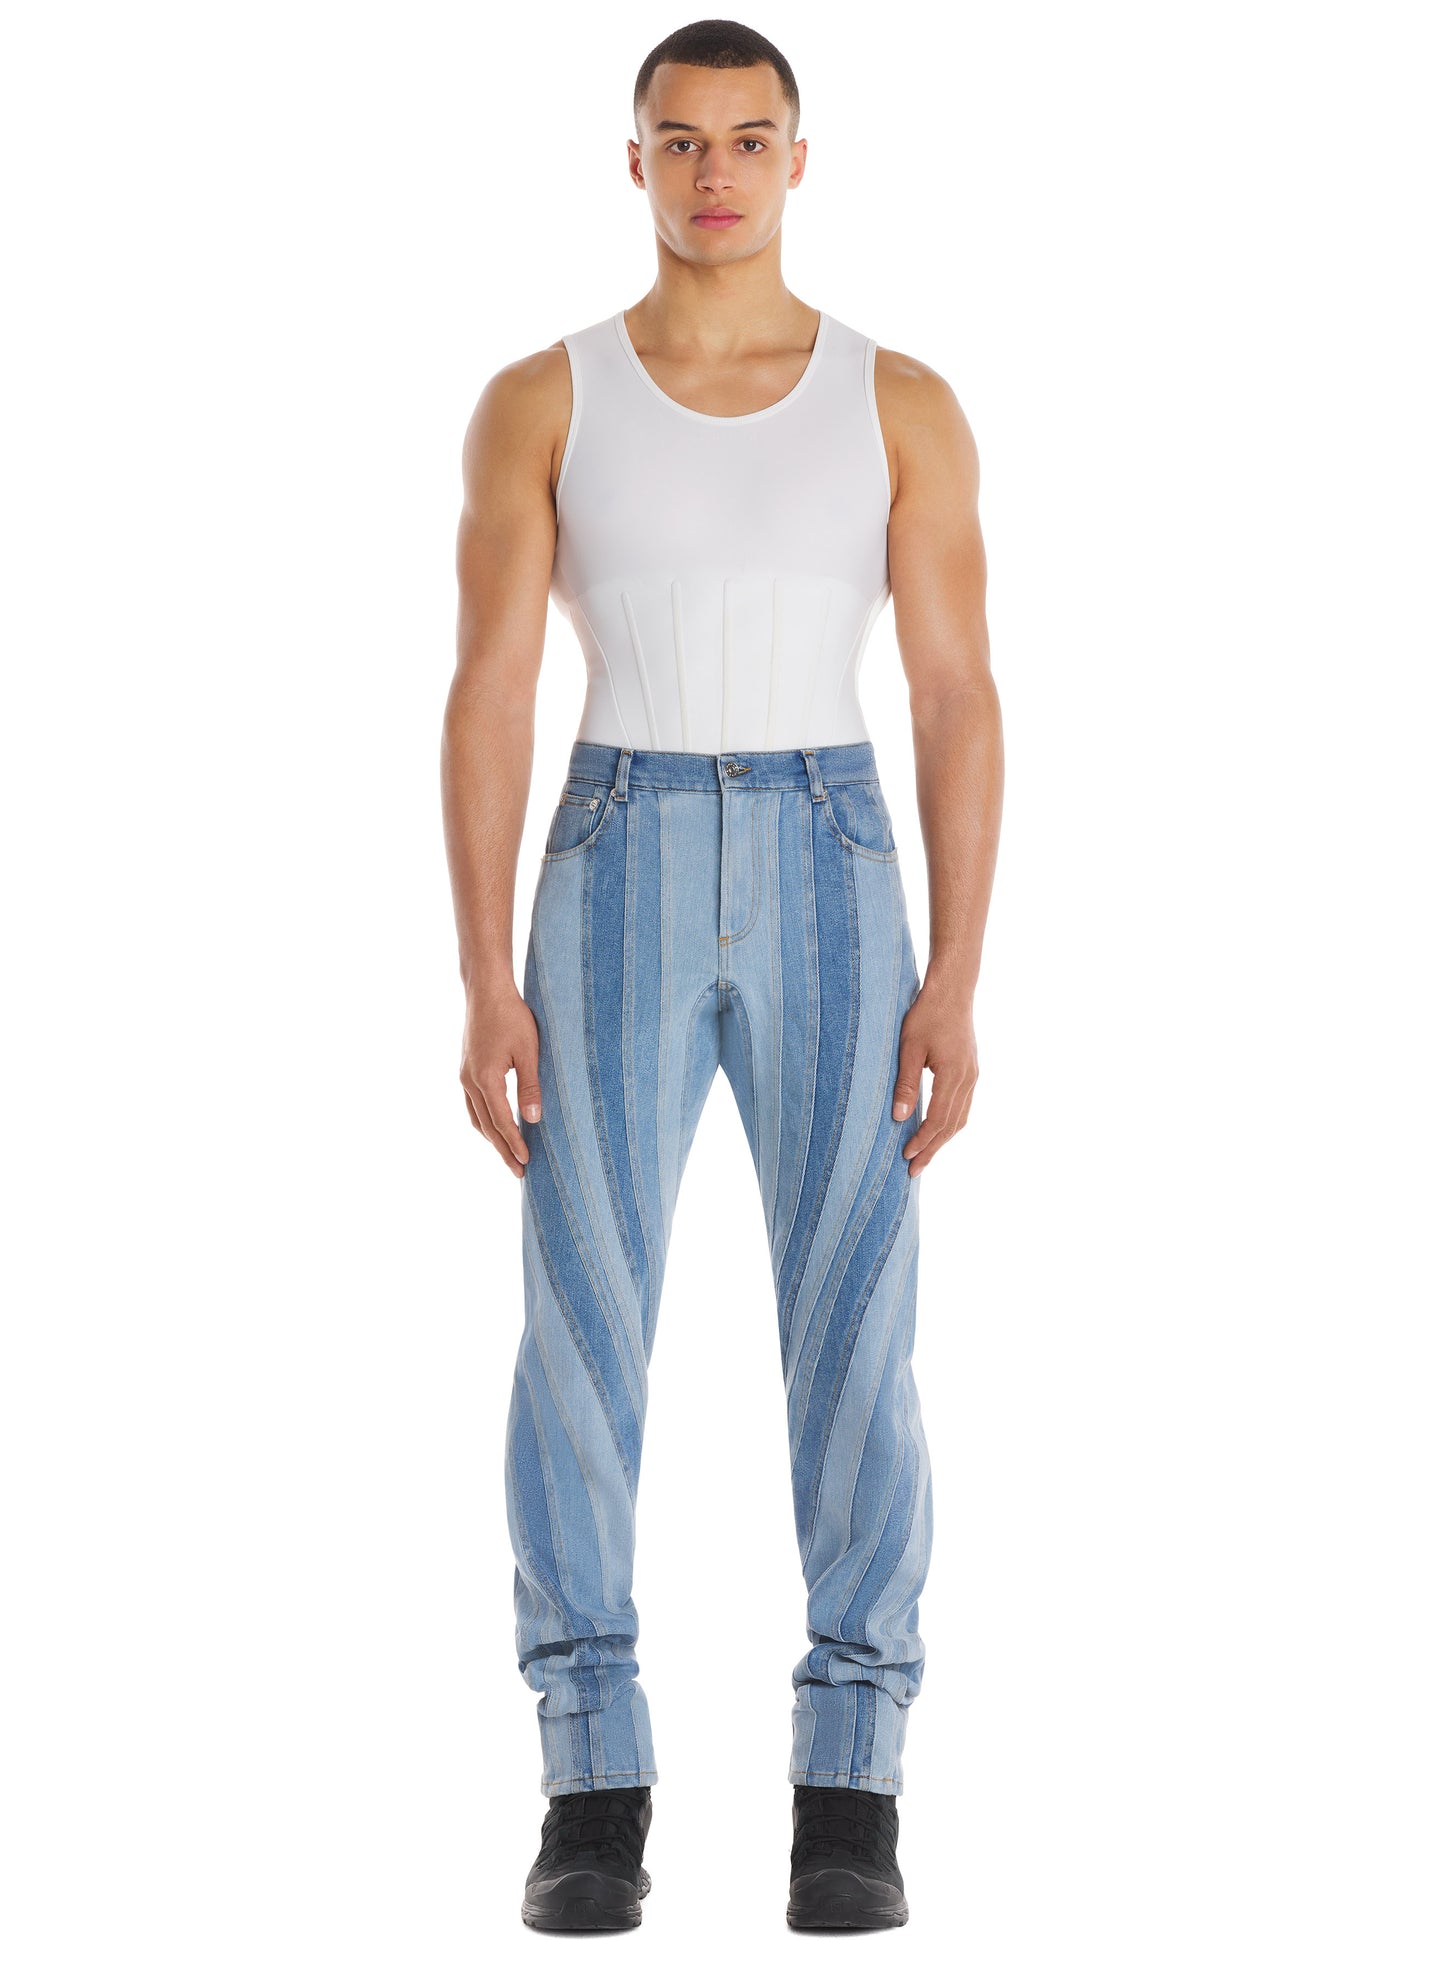 Spiral baggy jeans